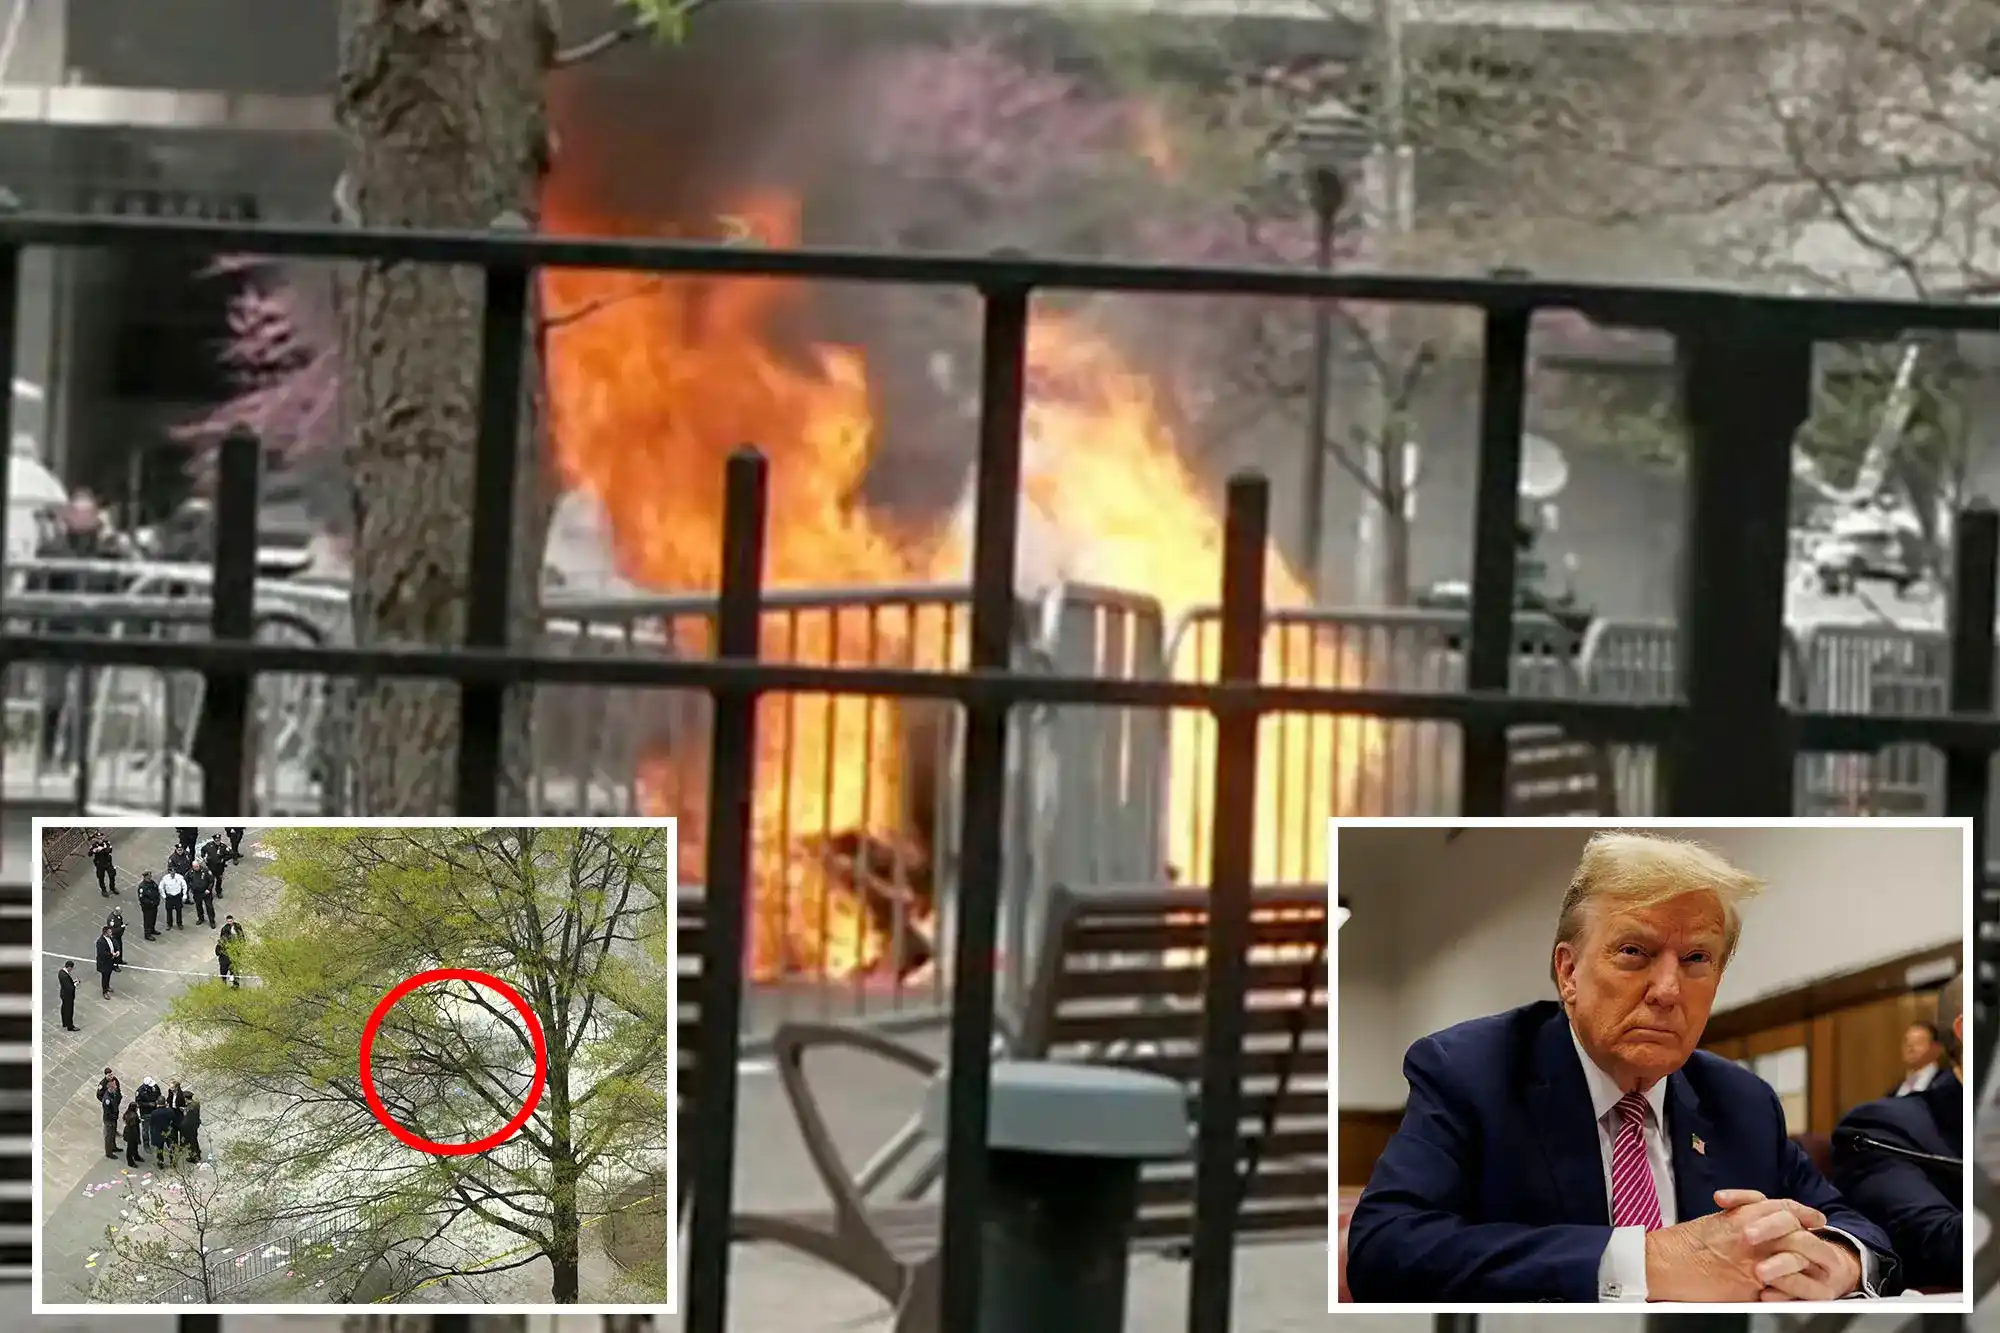 man-sets-himself-on-fire-outside-donald-trump-trial-in-manhattan/